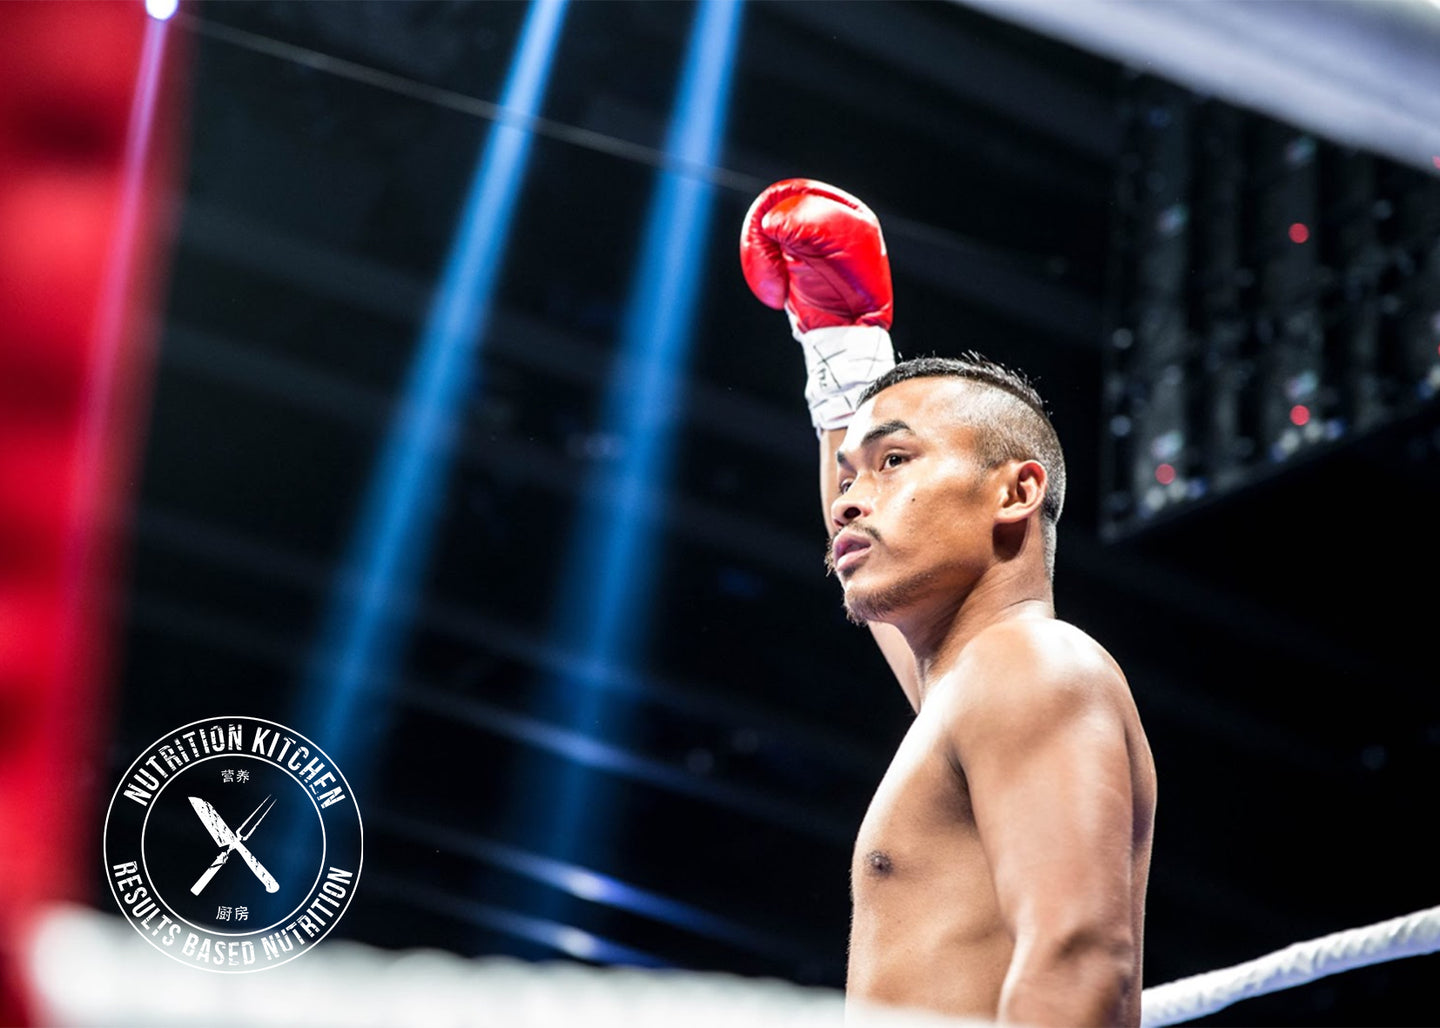 Boxing Champion Sure Gurung talks to Nutrition Kitchen